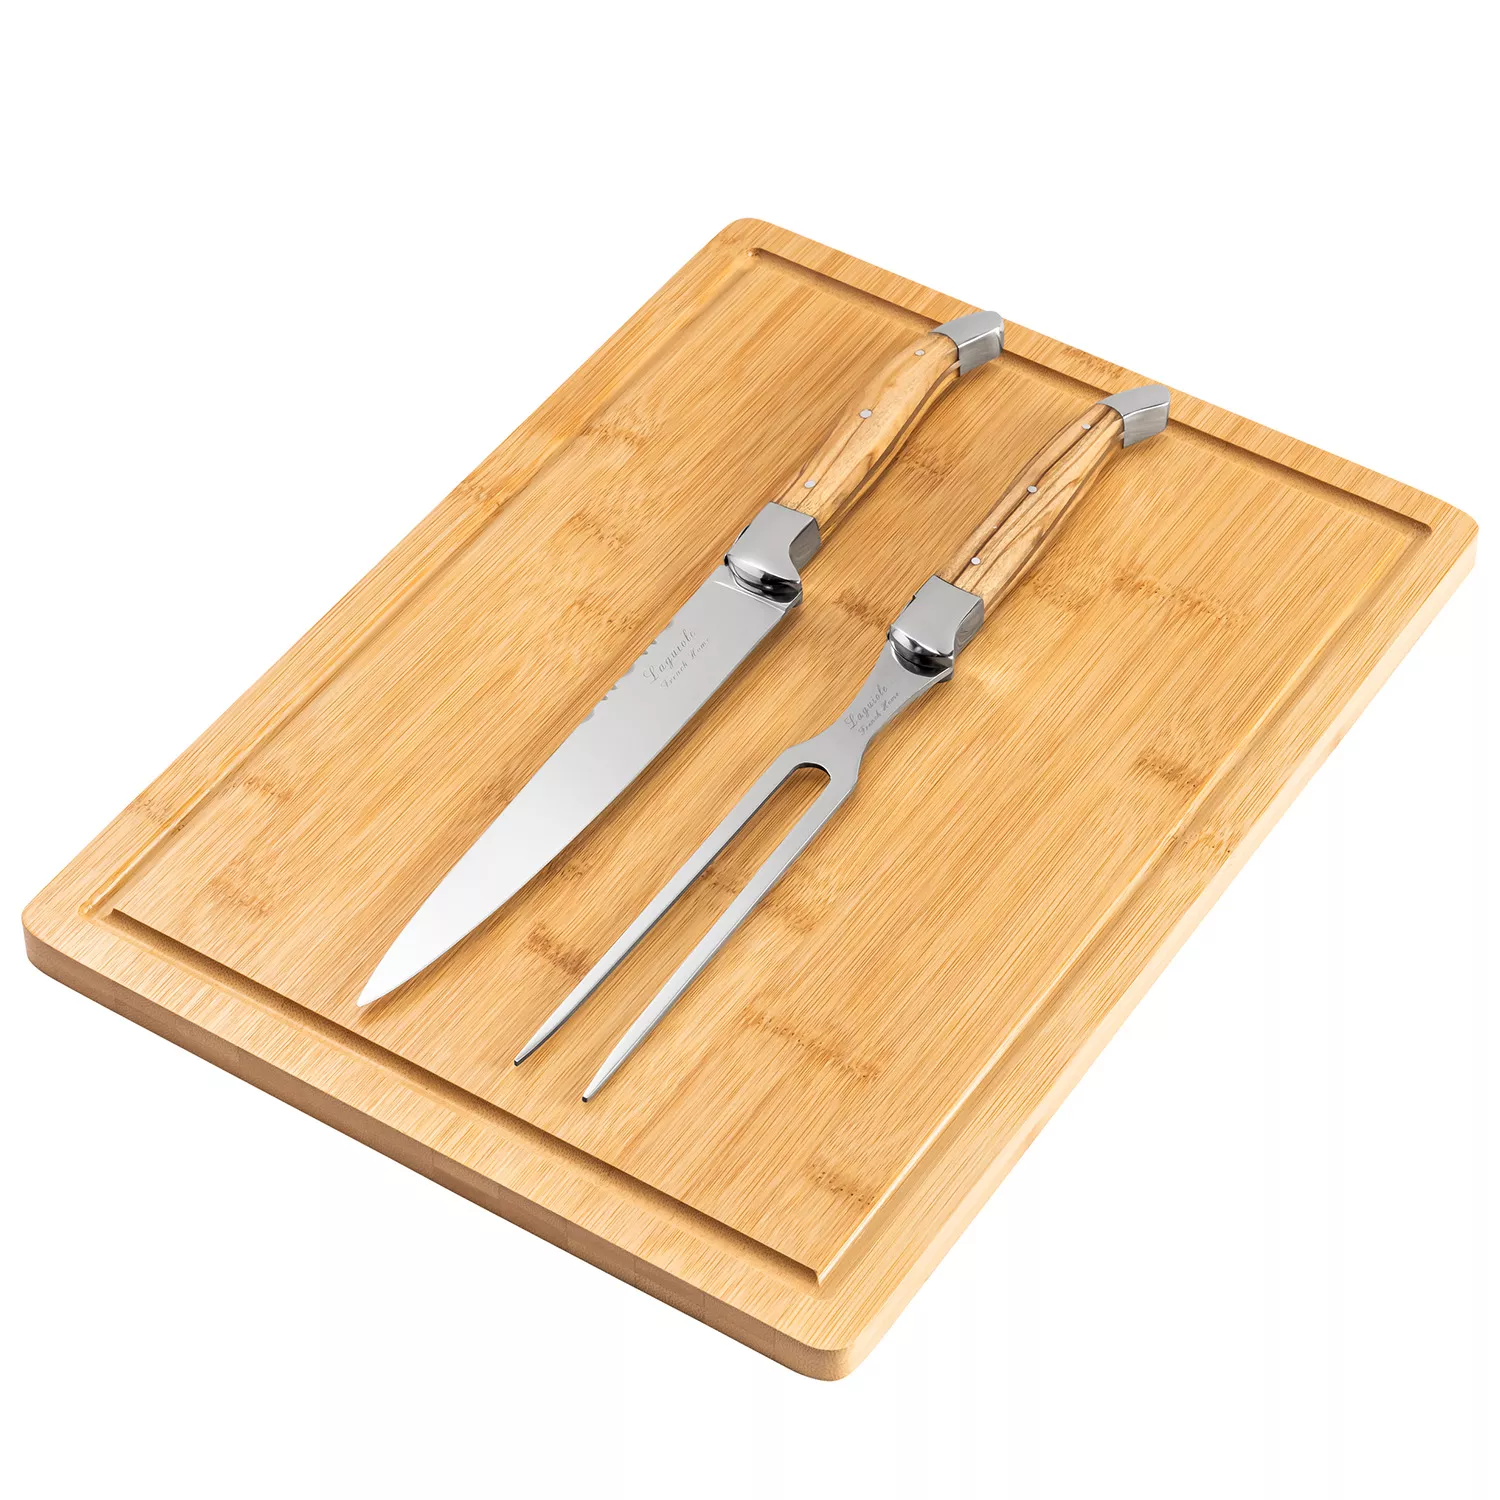 French Home Connoisseur Olive Wood Carving Set and Bamboo Cutting Board with Moat